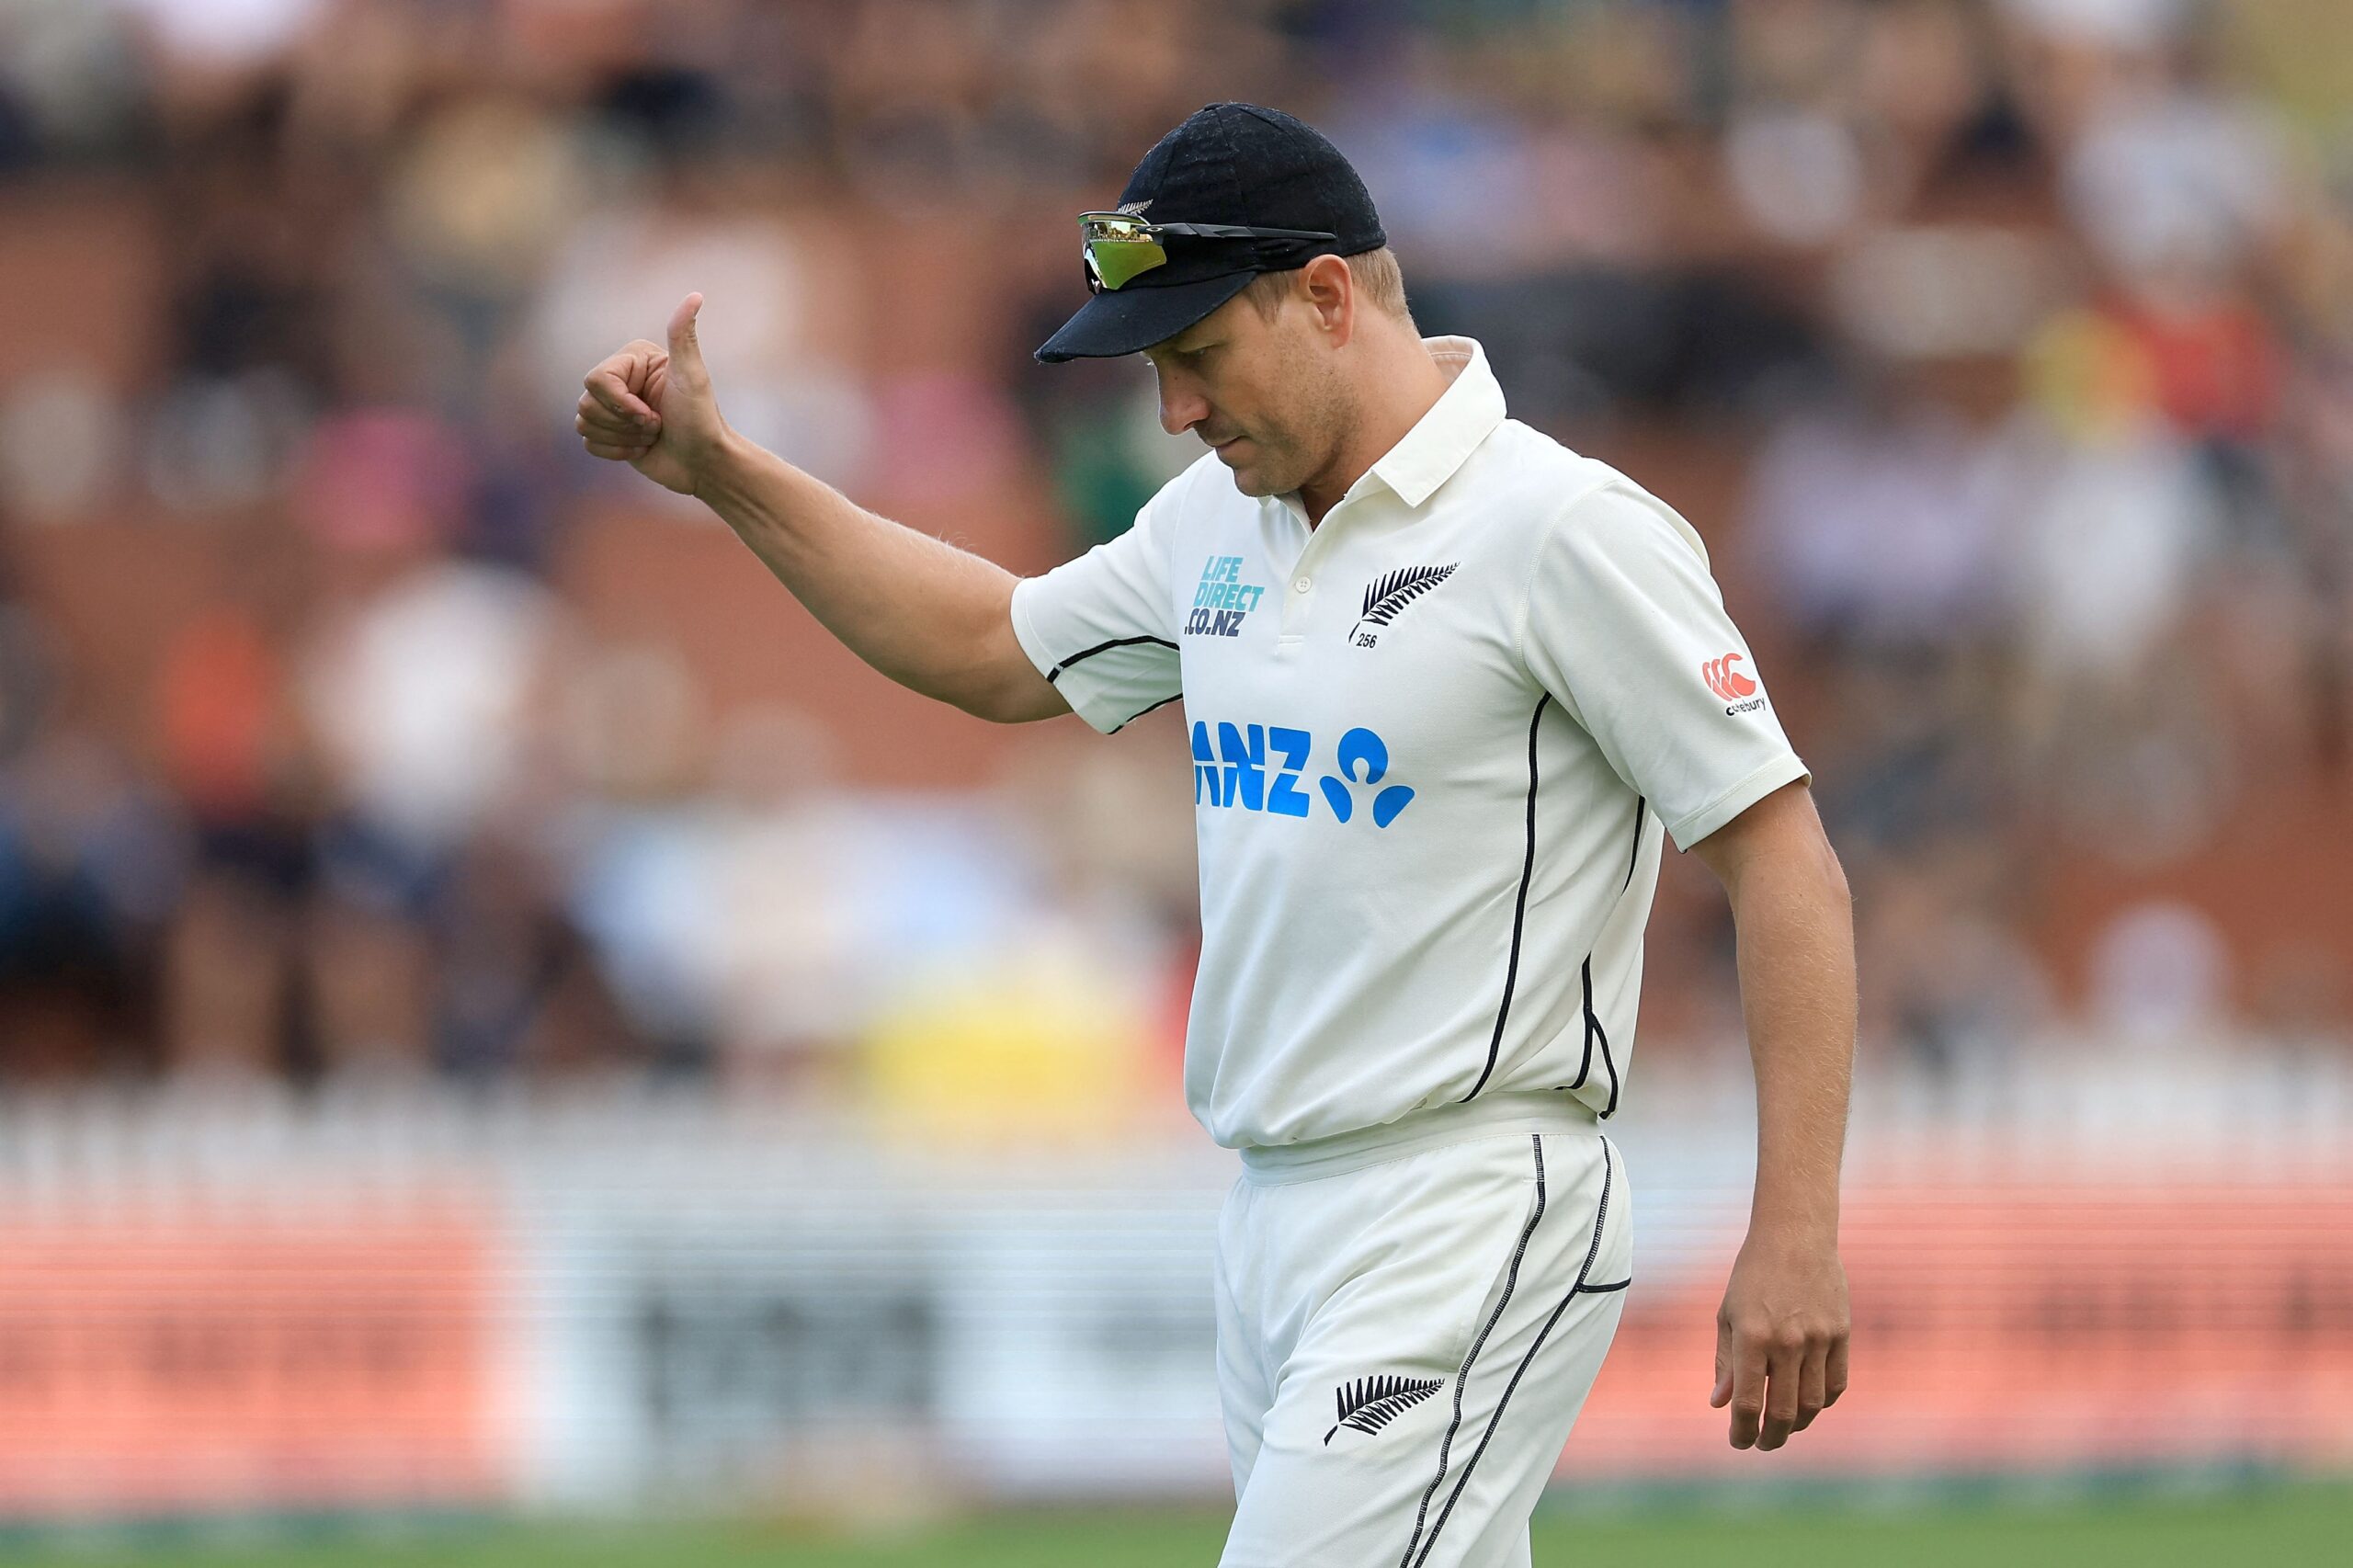 “We Have To Make Decision”: Tim Southee On Recalling Retired Neil Wagner For 2nd Test vs Australia